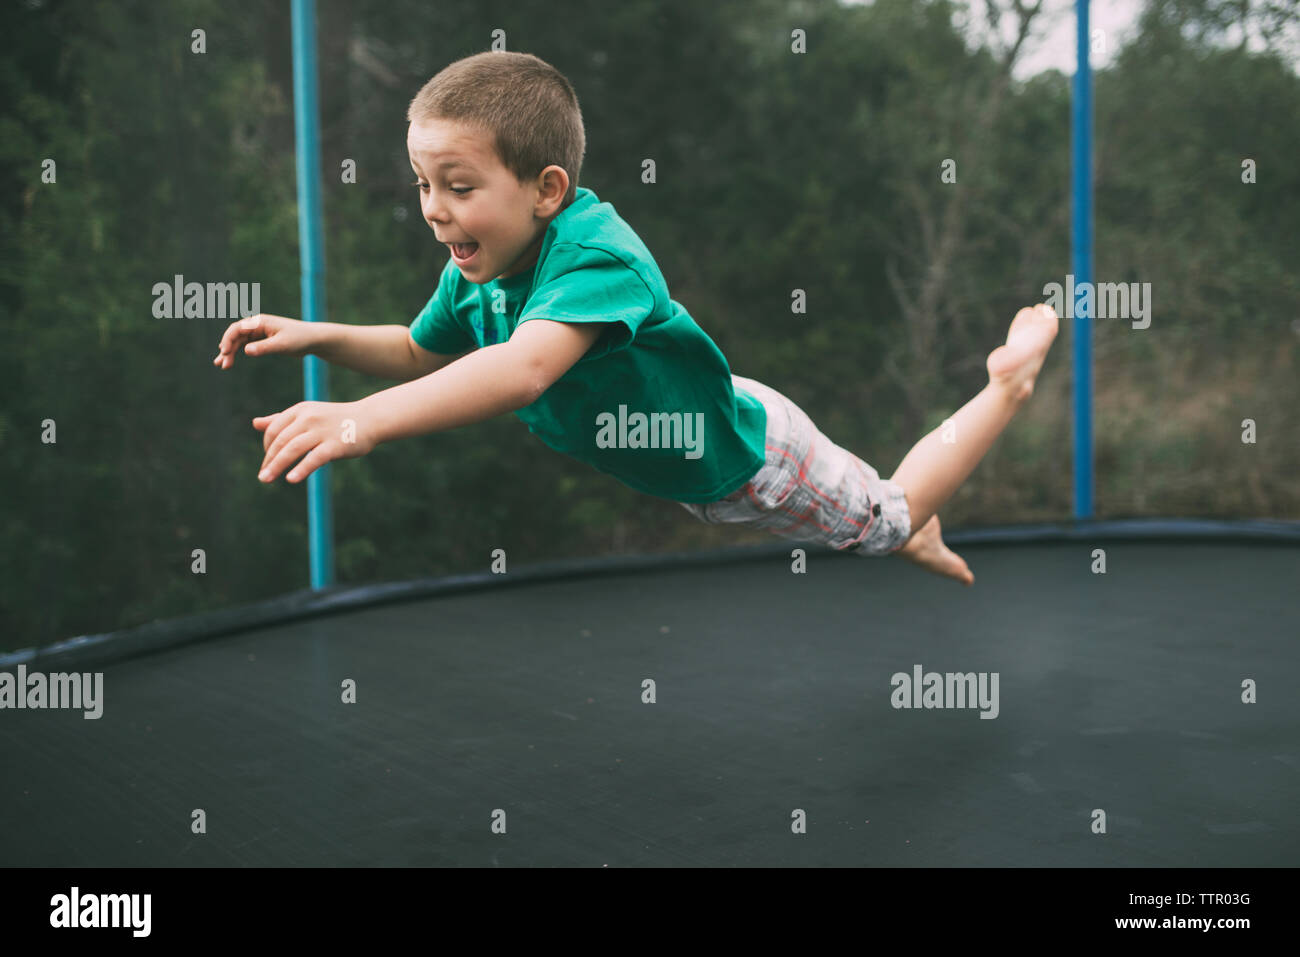 Playful boy jumping on trampoline at playground Stock Photo